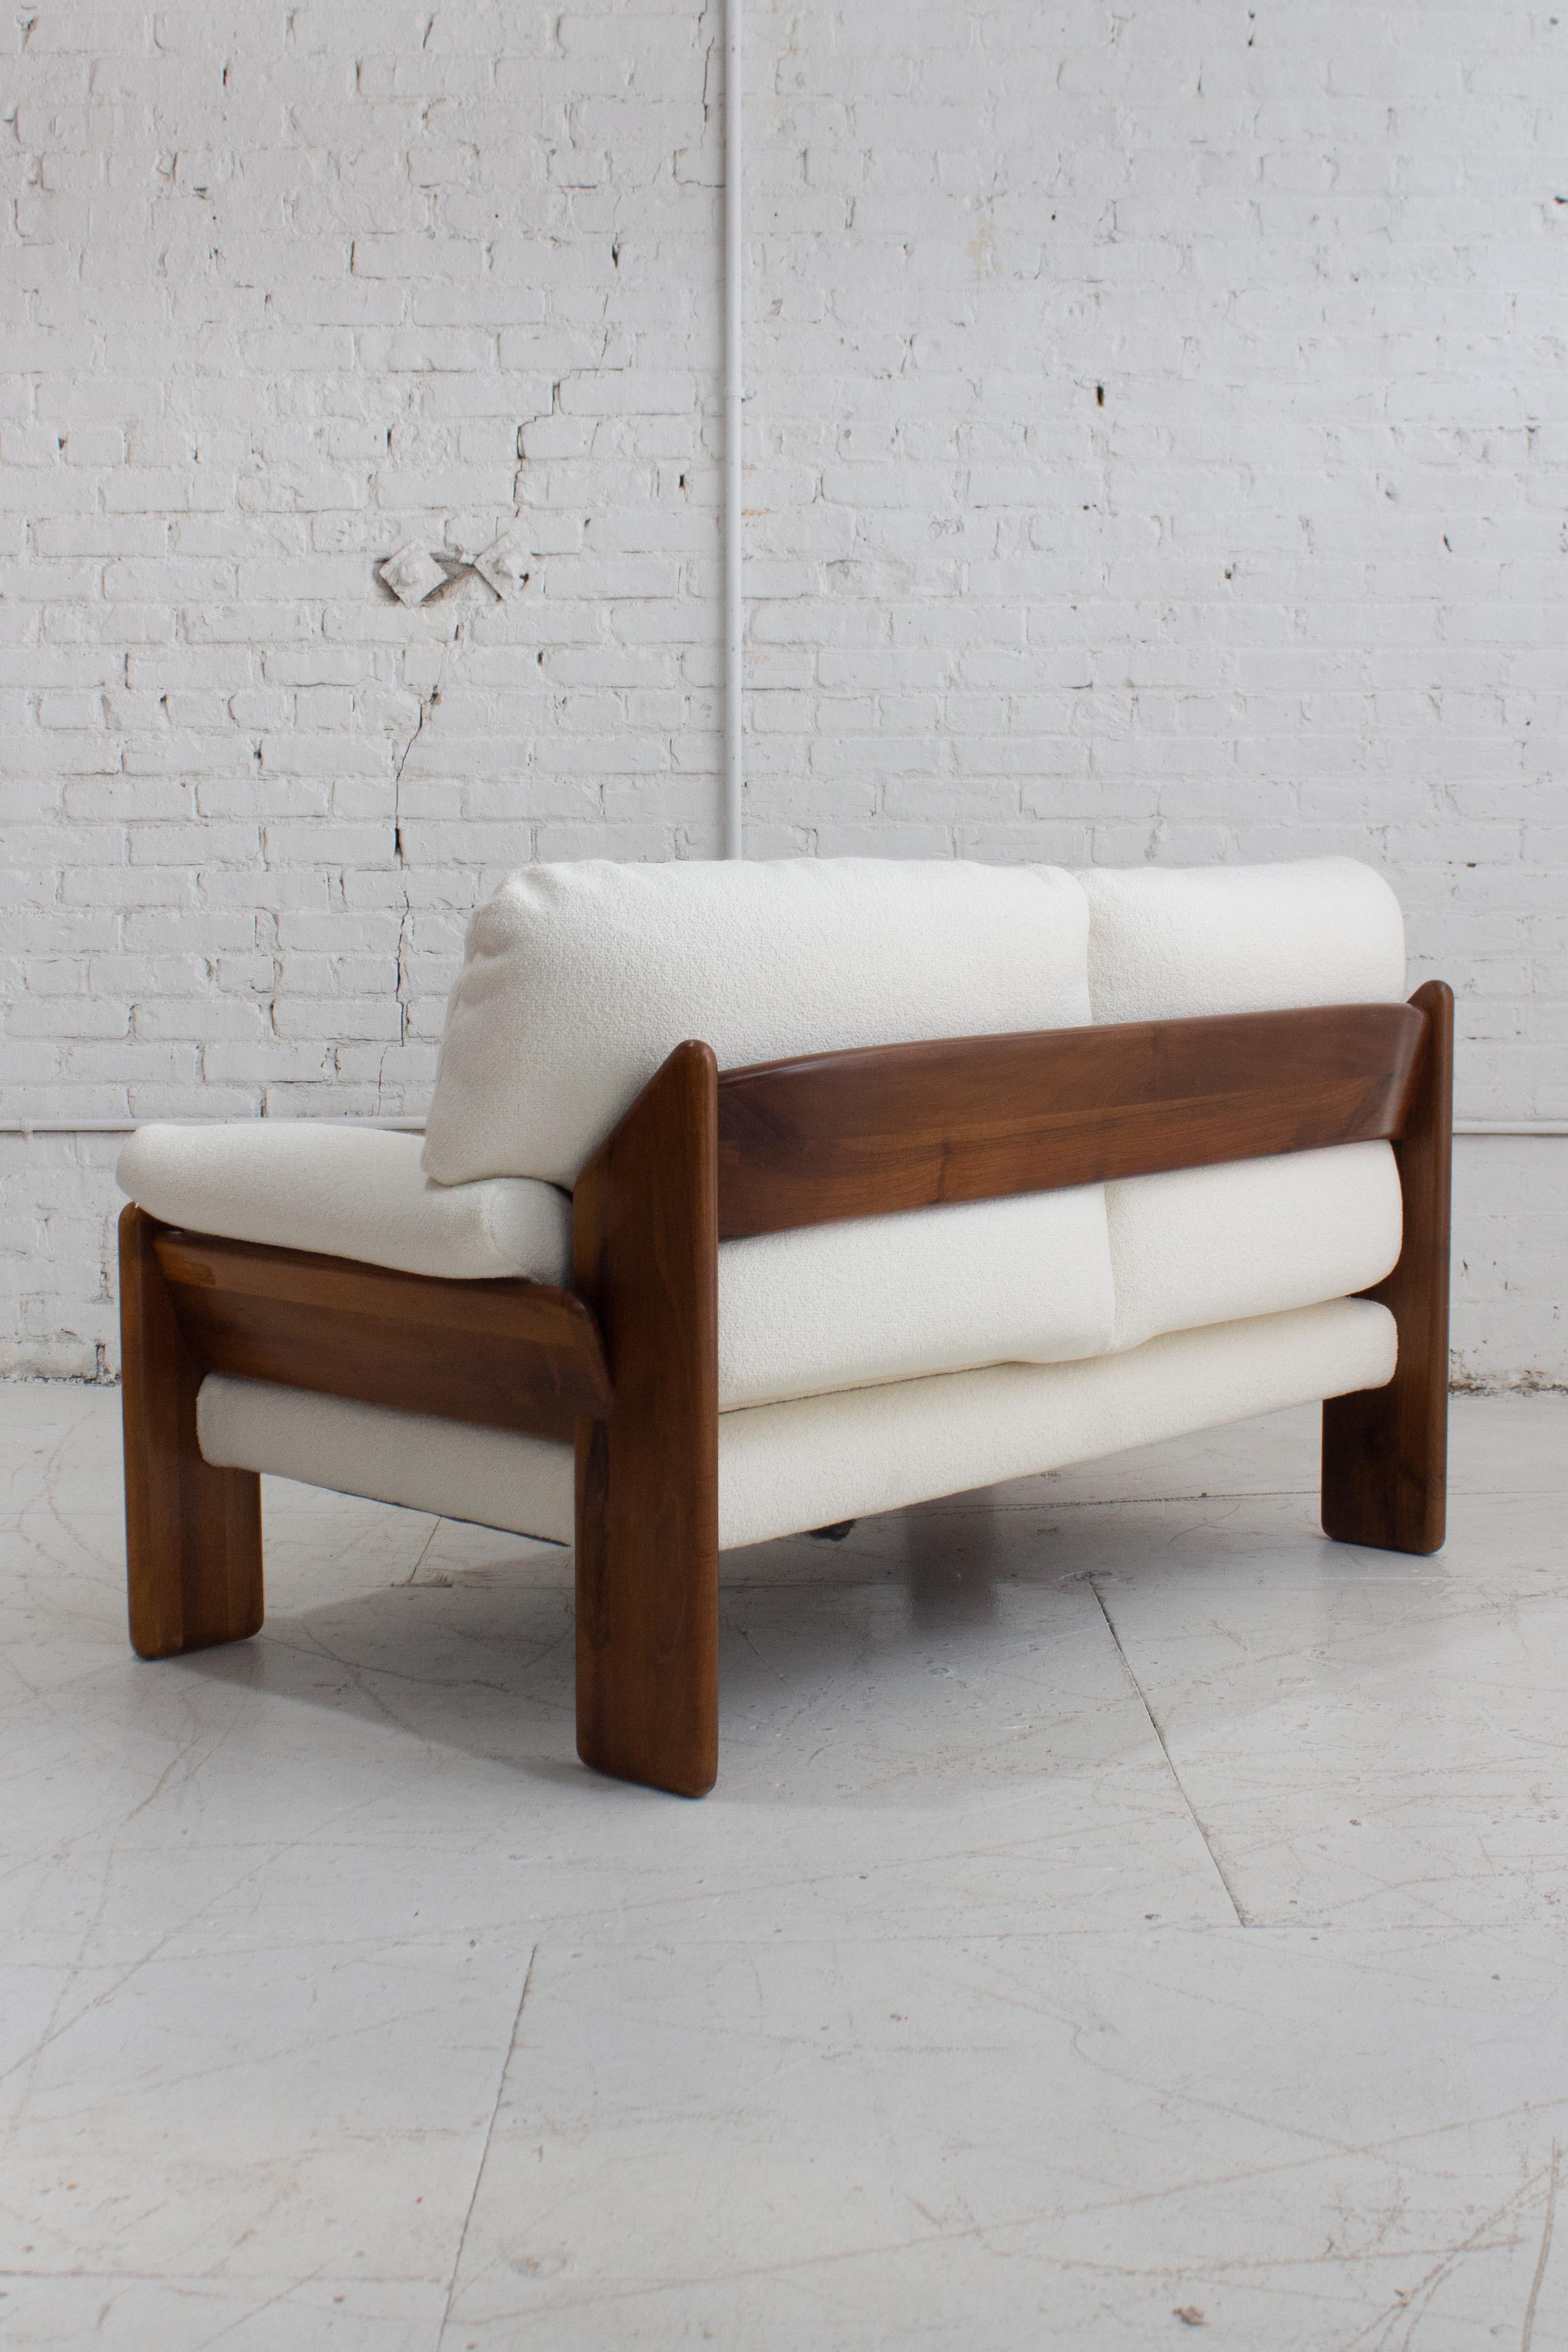 'Sapporo' Wood Frame Two Seat Sofa by Mario Marenco for Mobil Girgi For Sale 4